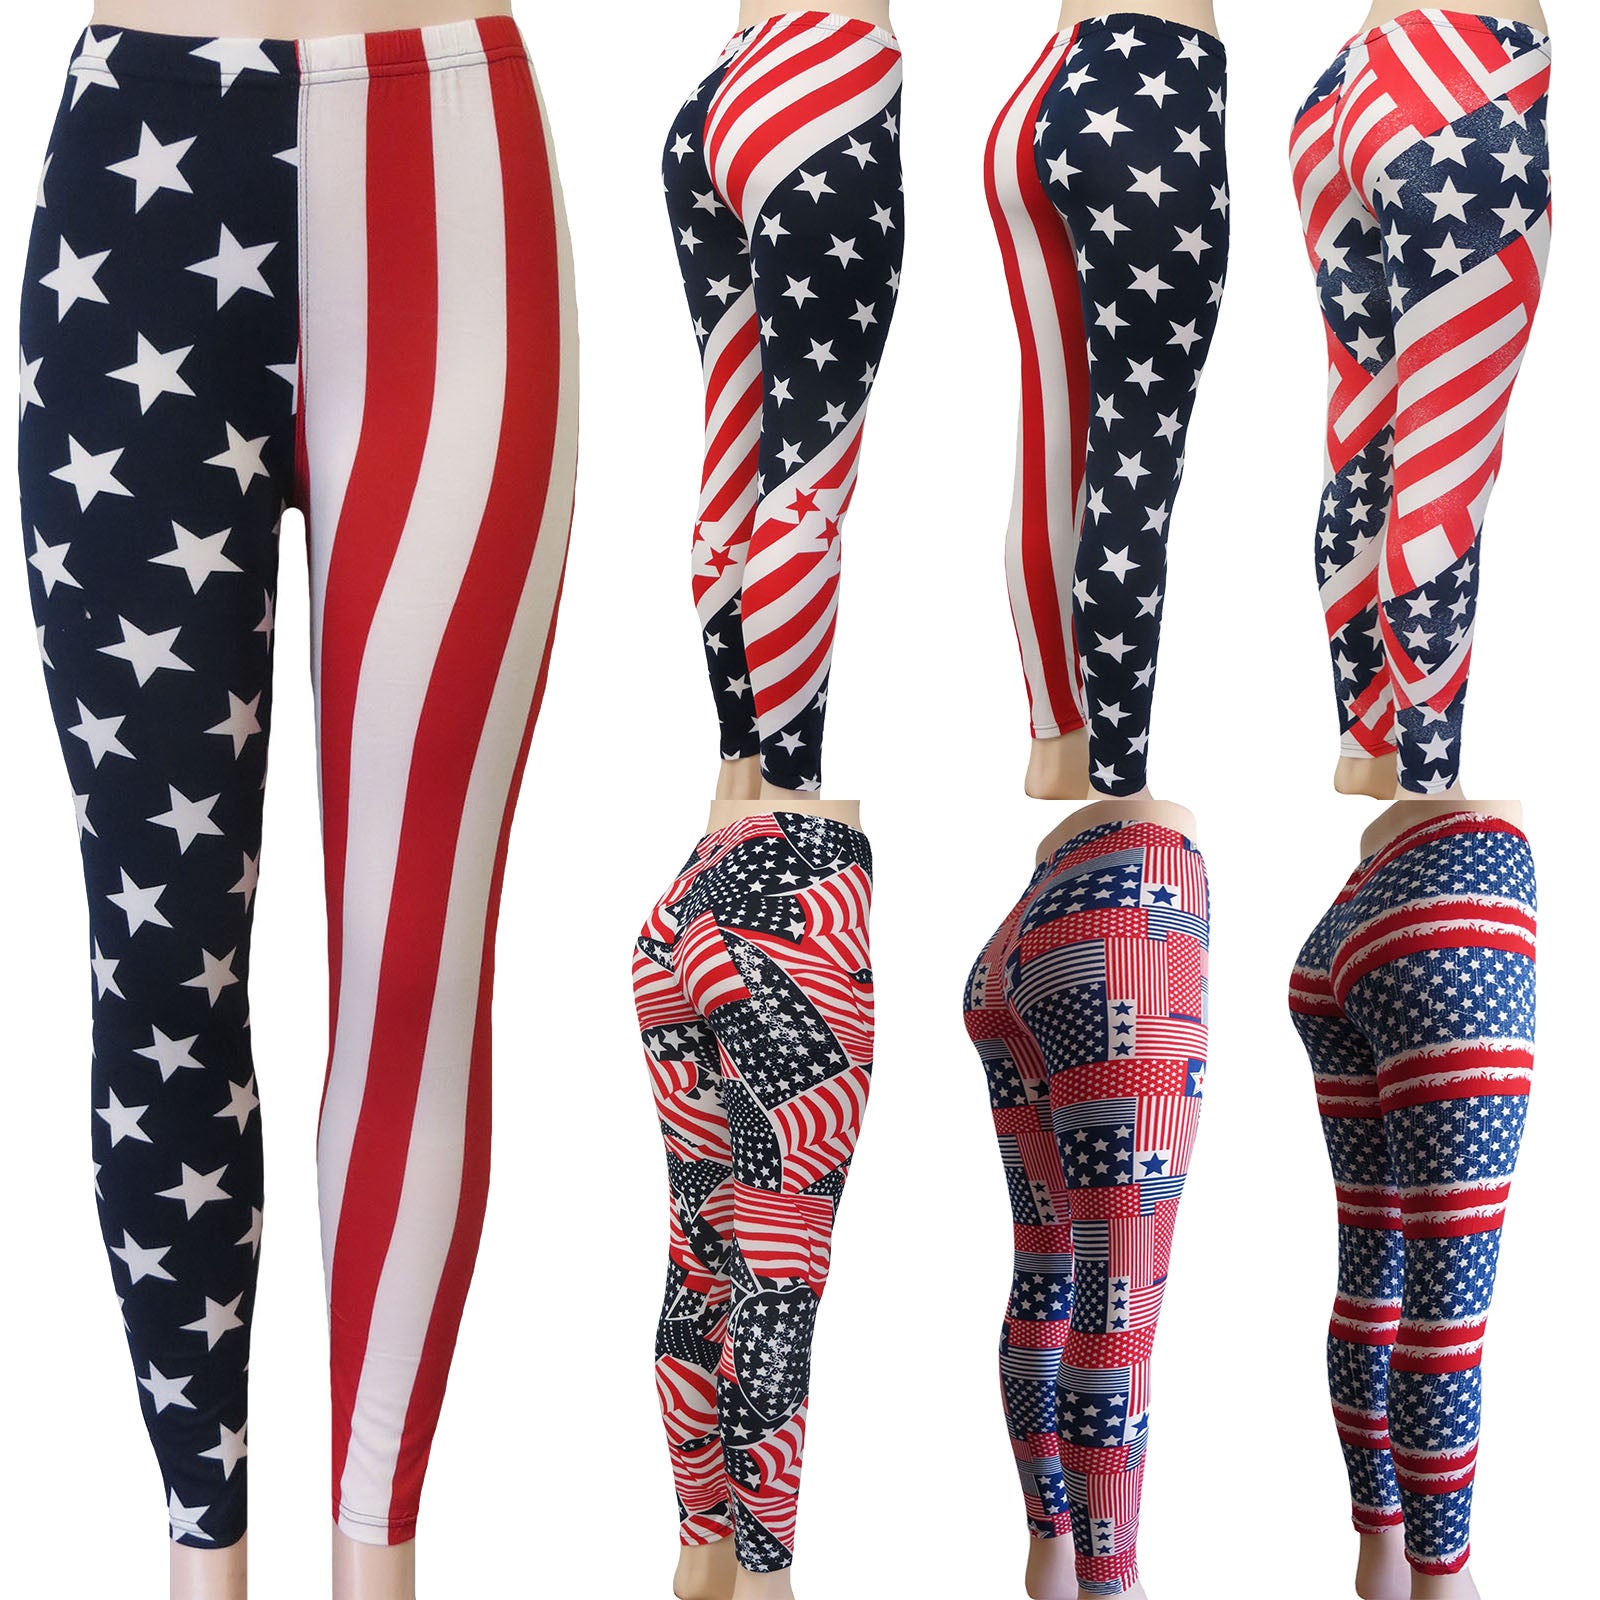 ITEM NUMBER: AP700-USA-FLAG (12 PIECE PACK WAS $3.00 - CLEARANCE SALE JUST  $2.00 / PIECE) CLEARANCE AMERICAN FLAG LEGGINGS